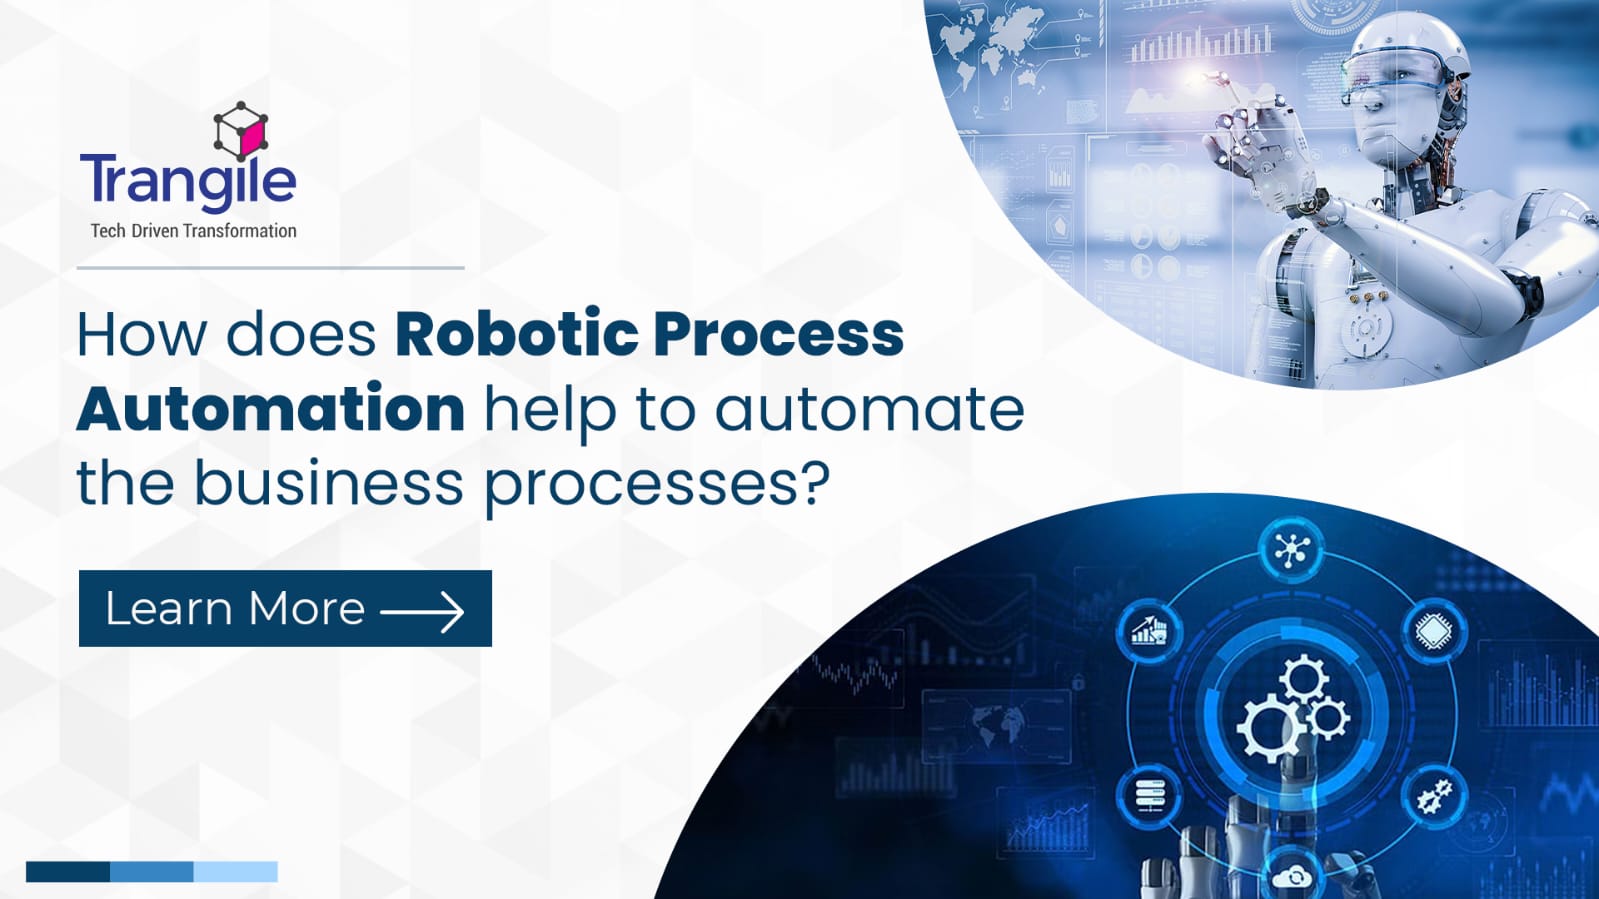 How does RPA help to automate the business processes?